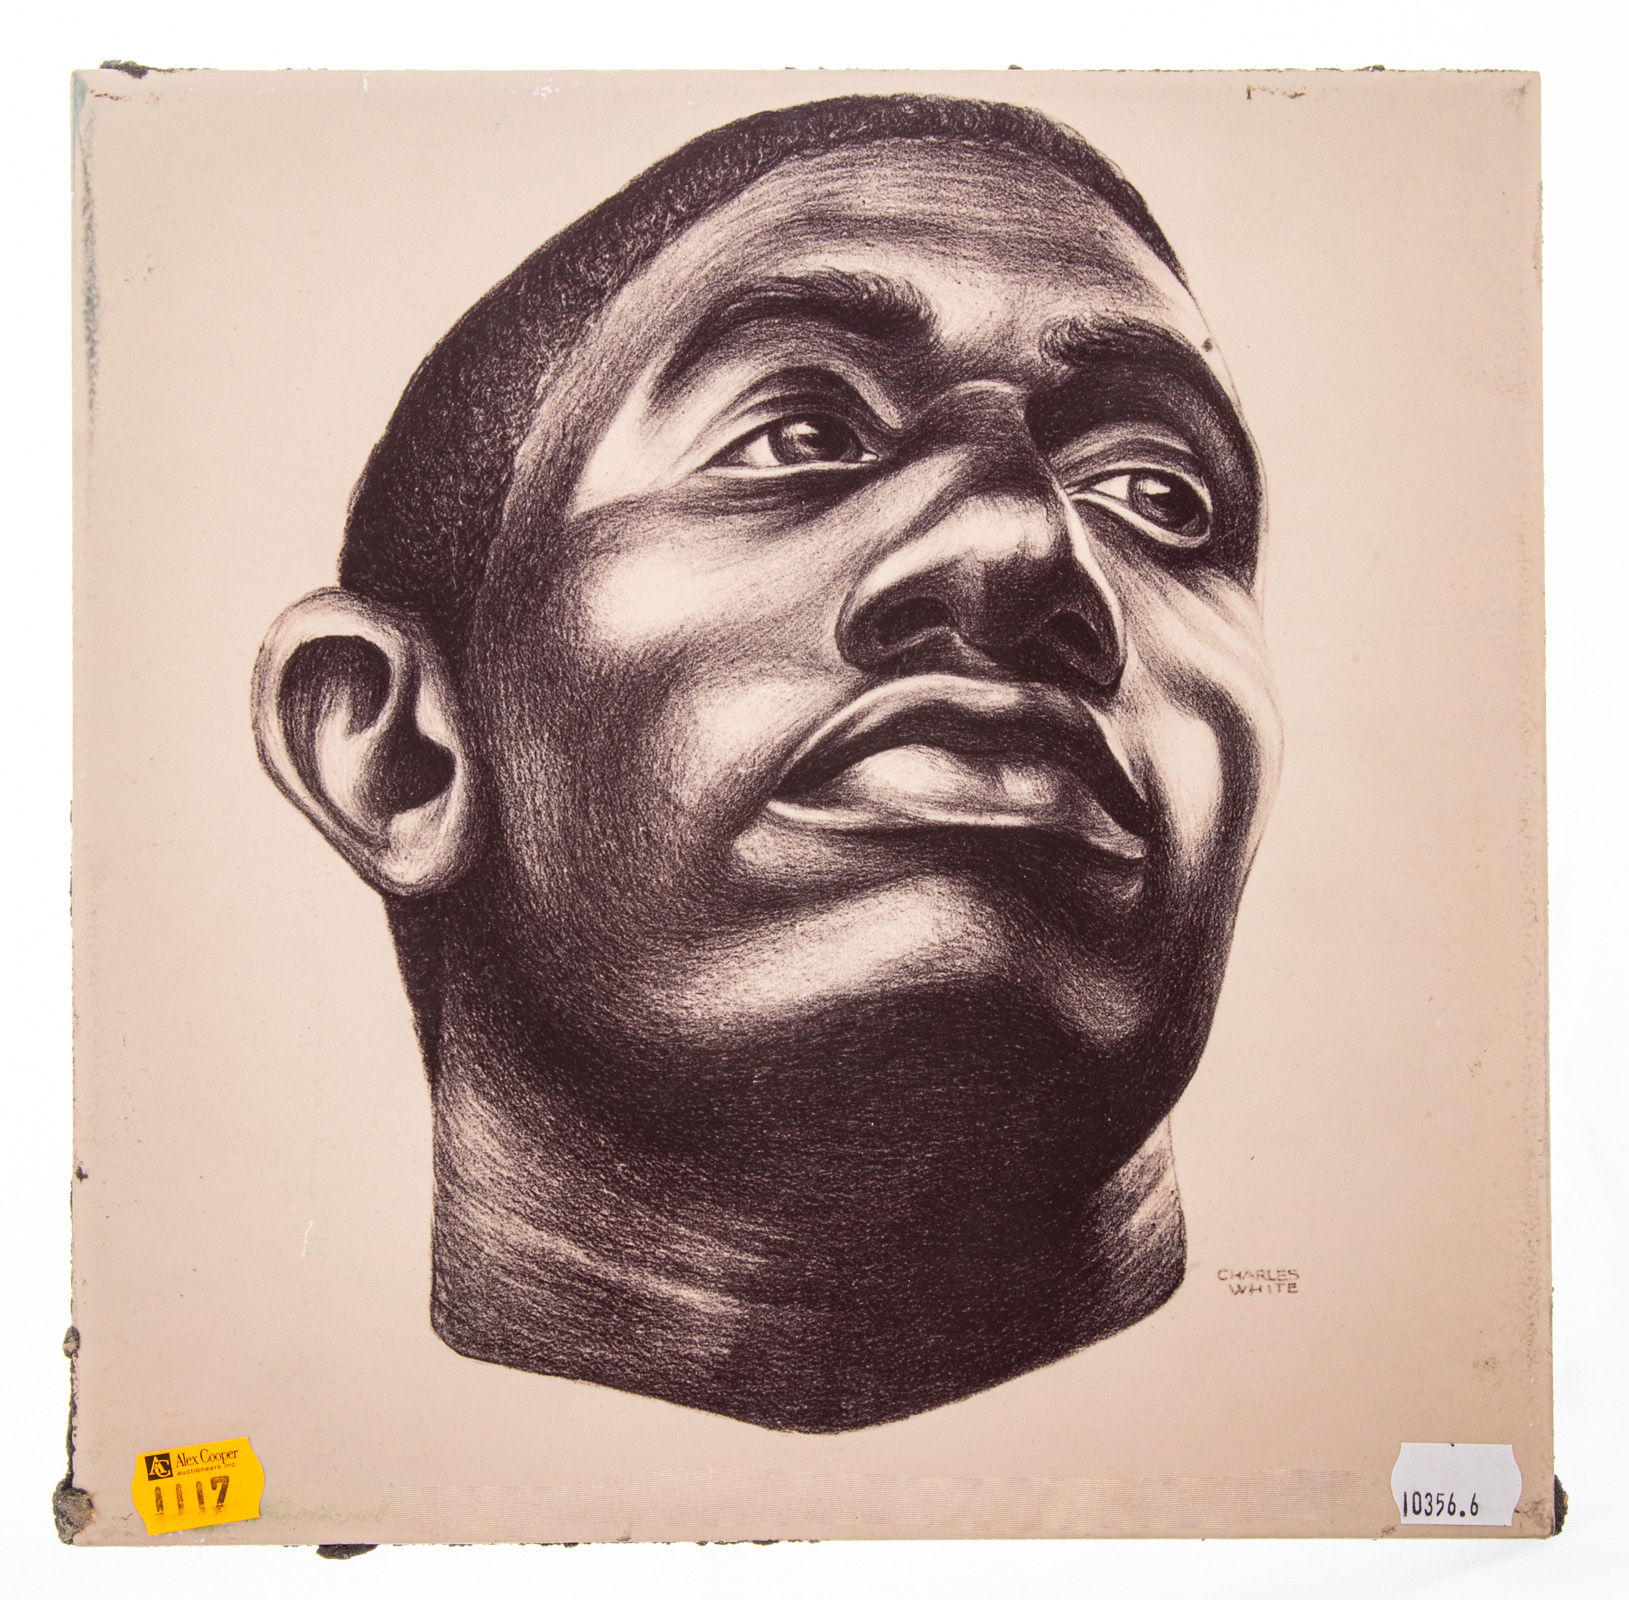 CHARLES WHITE. PORTRAIT OF MAN, LITHOGRAPH